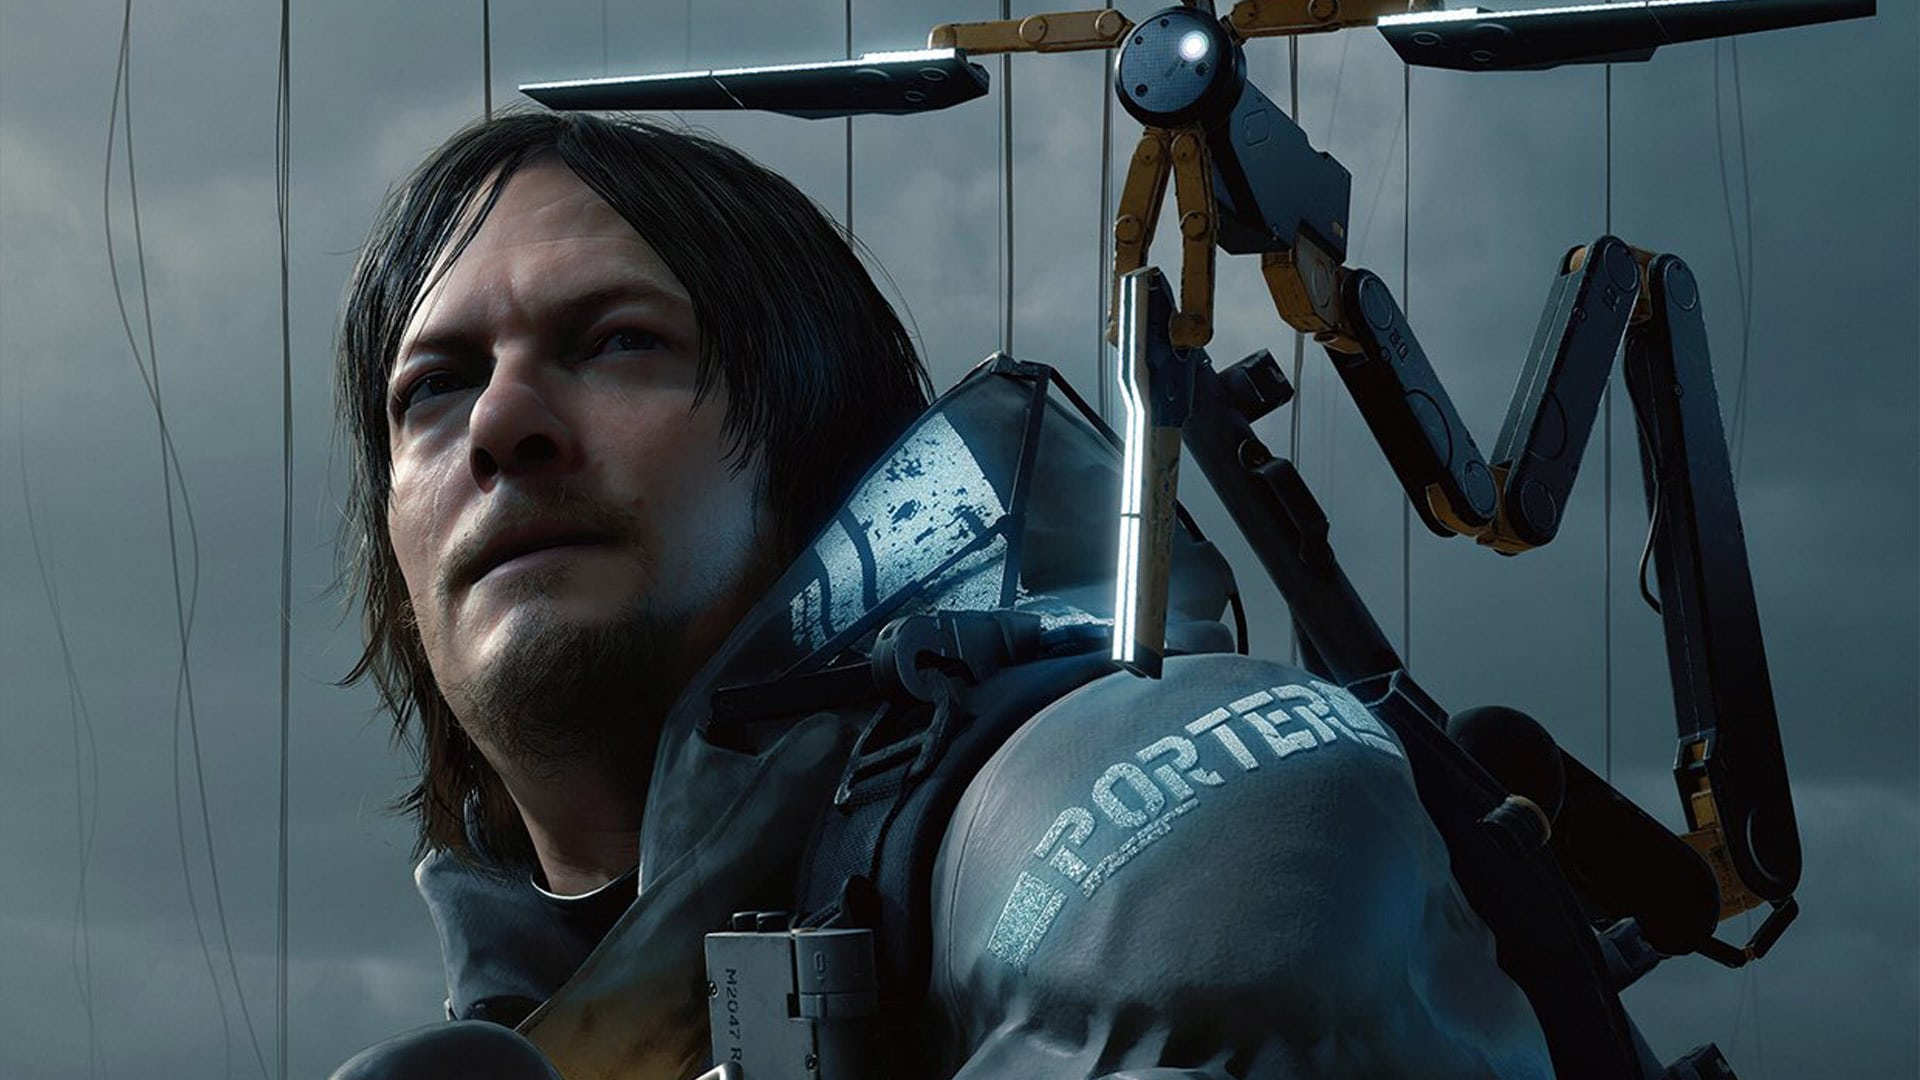 Death Stranding will launch on November 8 this year